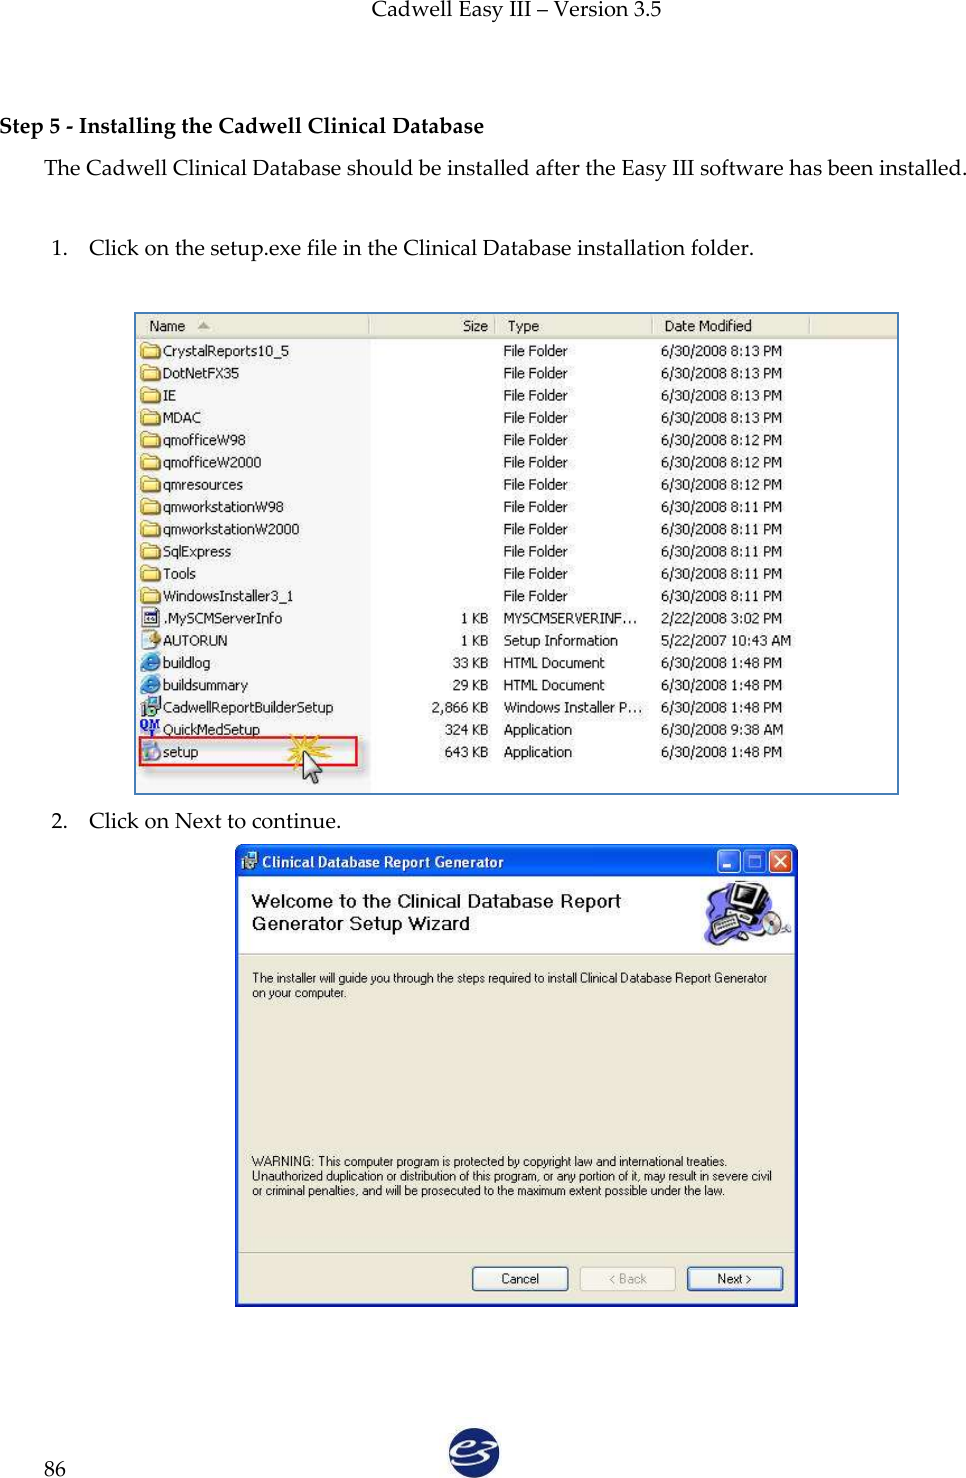 Cadwell Easy III – Version 3.5   86  Step 5 - Installing the Cadwell Clinical Database The Cadwell Clinical Database should be installed after the Easy III software has been installed.    1. Click on the setup.exe file in the Clinical Database installation folder.   2. Click on Next to continue.  